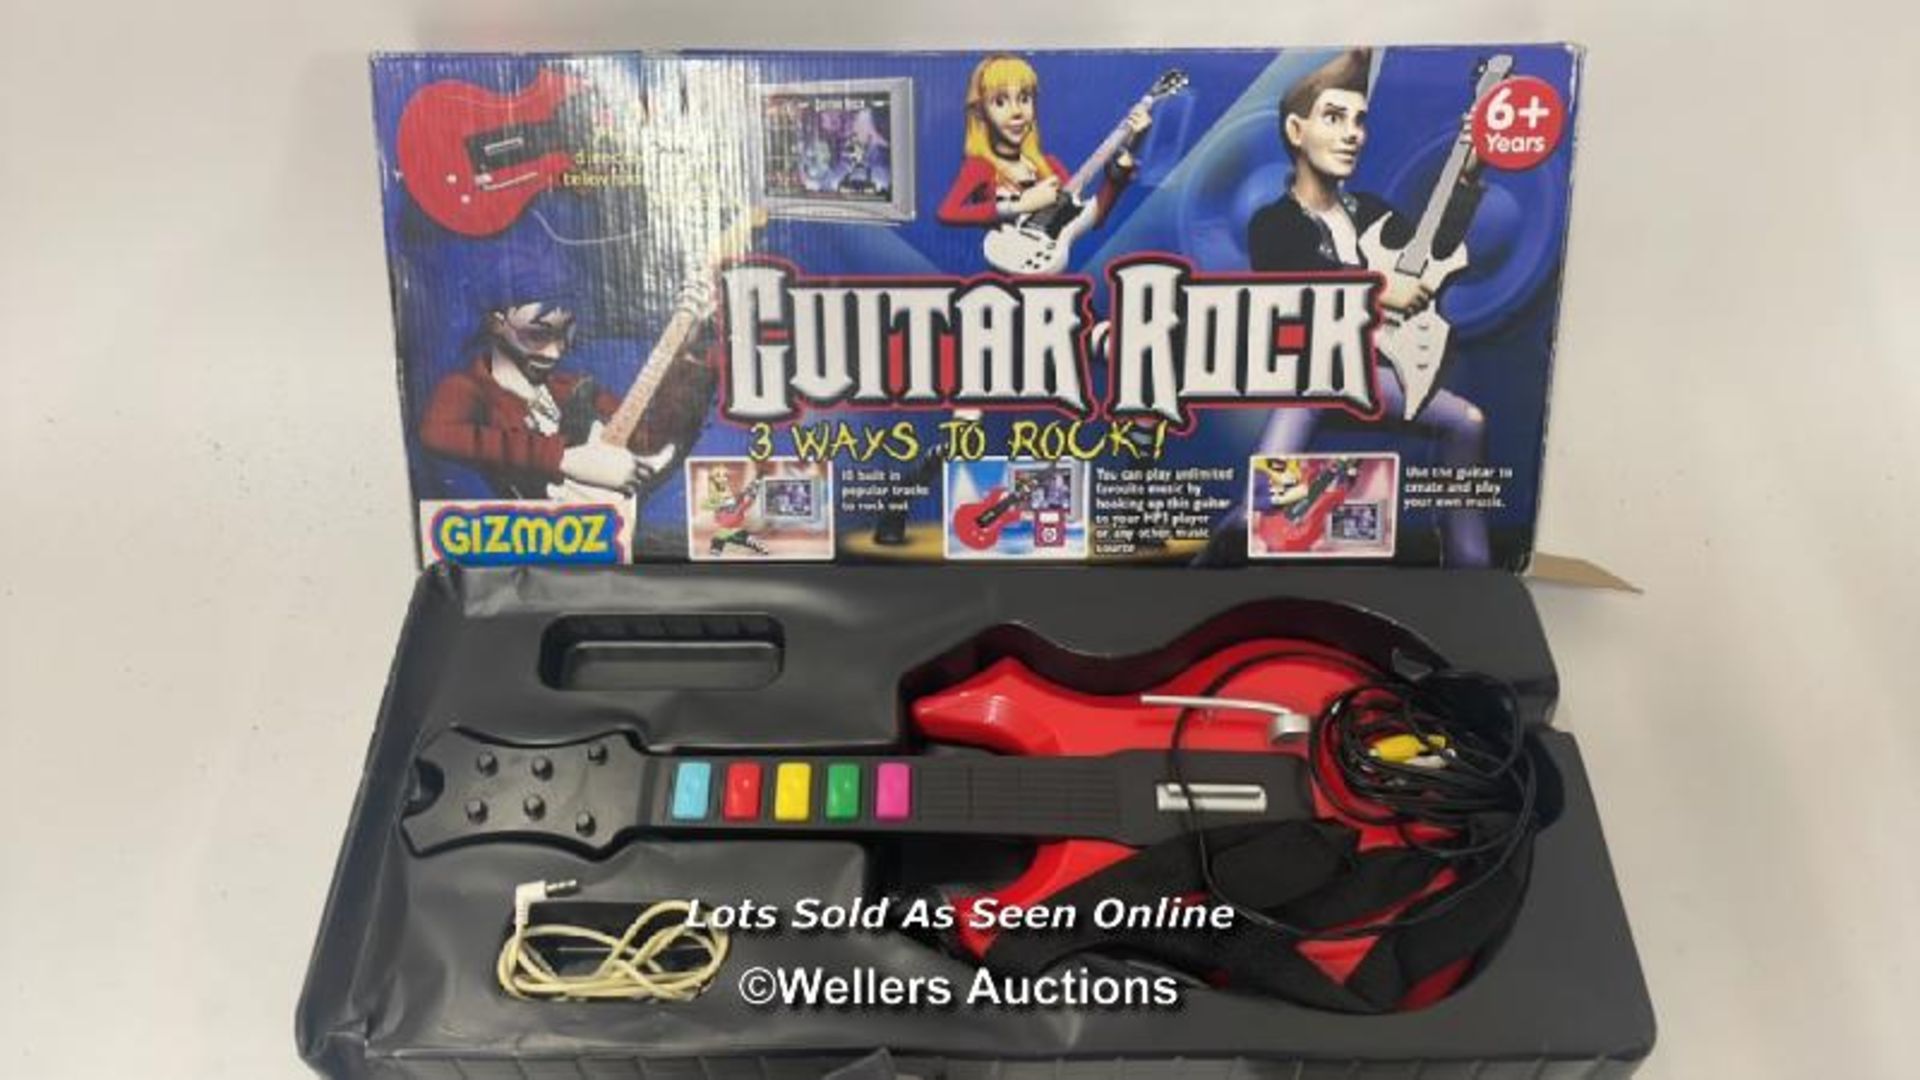 Tactico Football Edition board game, Guitar Rock and Total War Eras for Sega, unchecked - Image 2 of 6